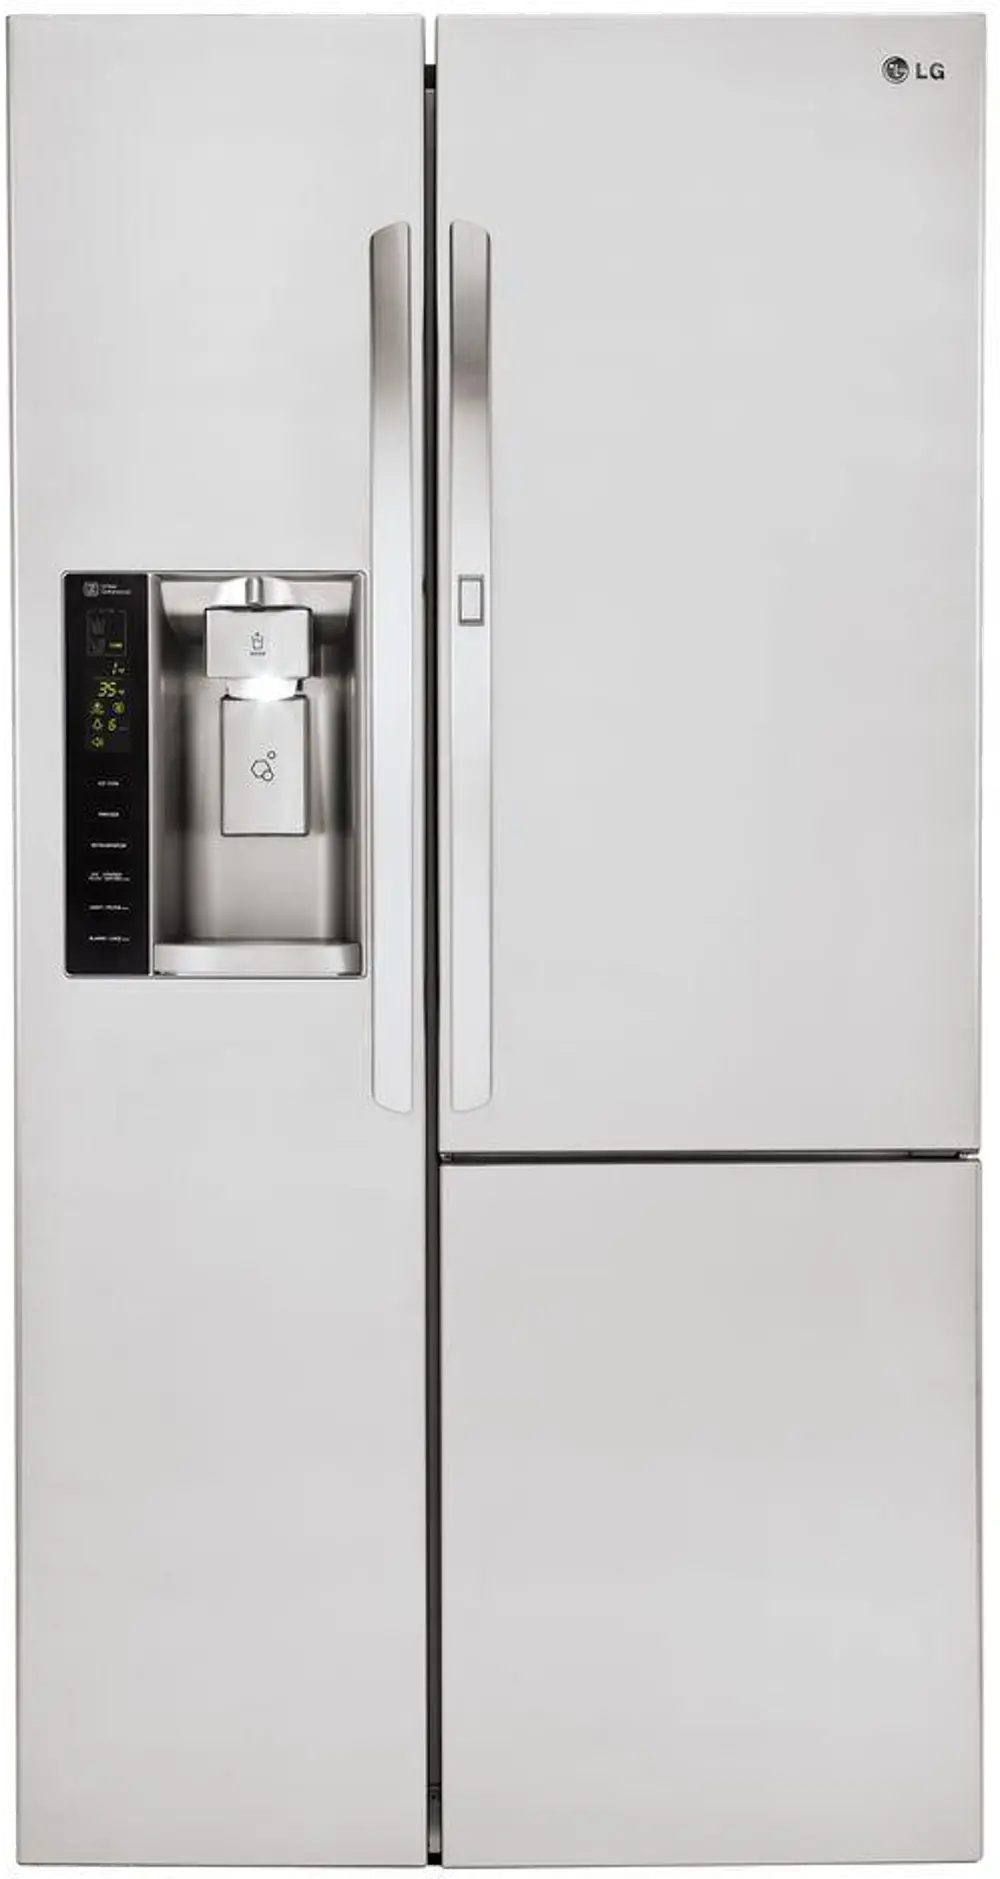 LSXS26366S LG 26.1 cu ft Side by Side Refrigerator - Stainless Steel-1